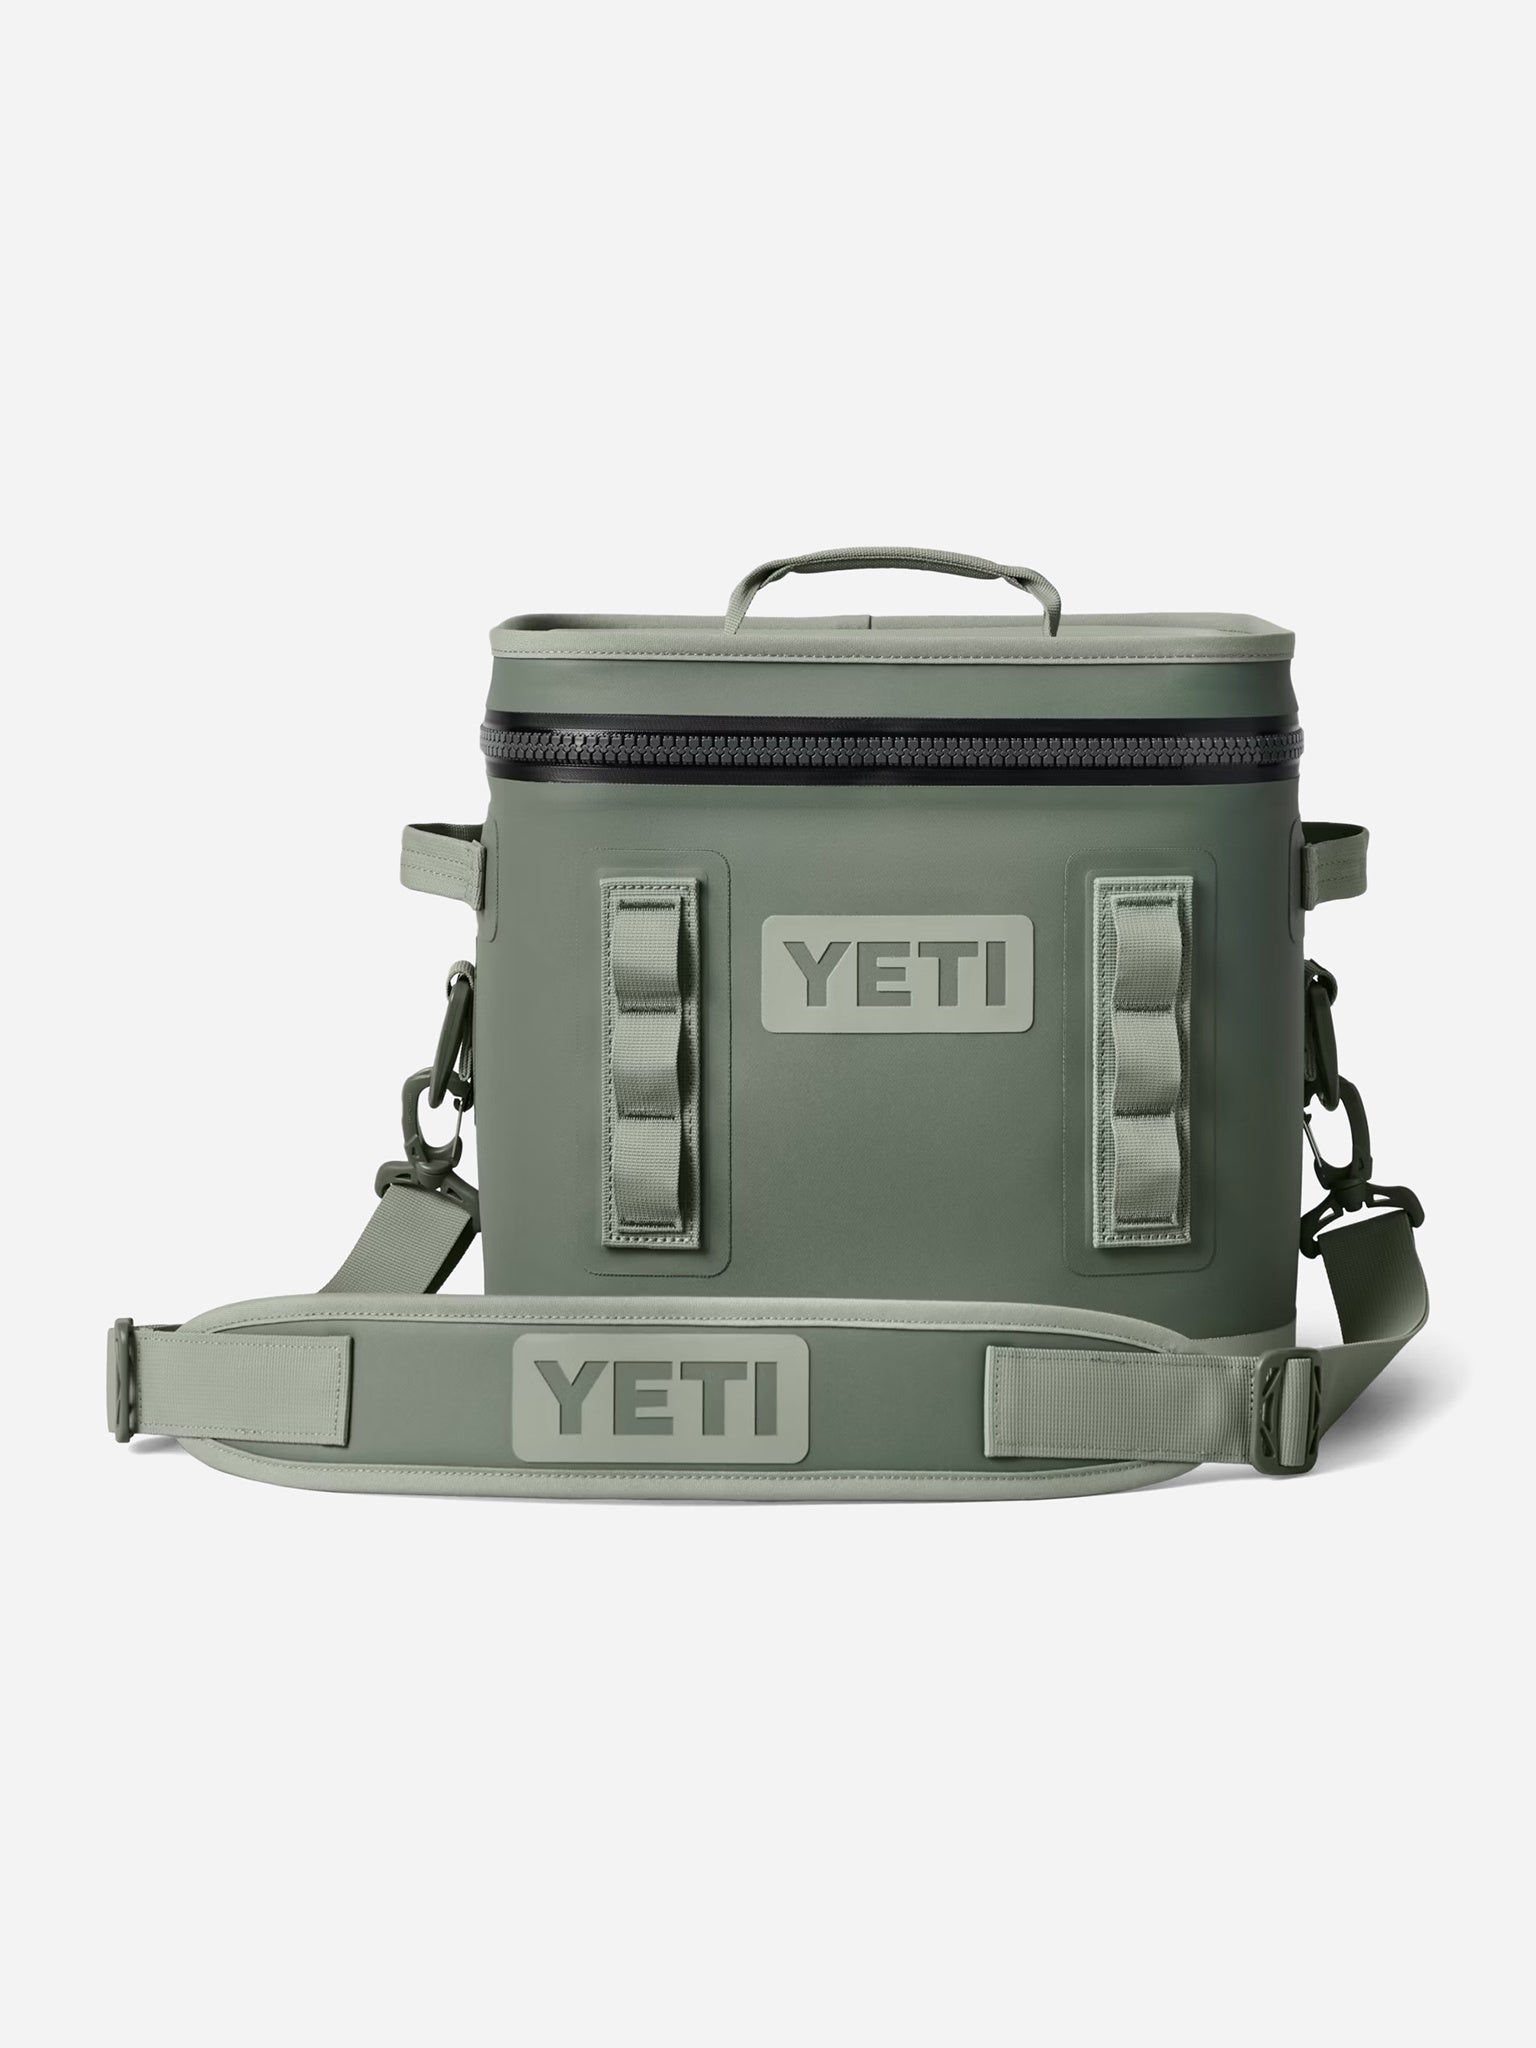 Possible fall release. Found on FB : r/YetiCoolers